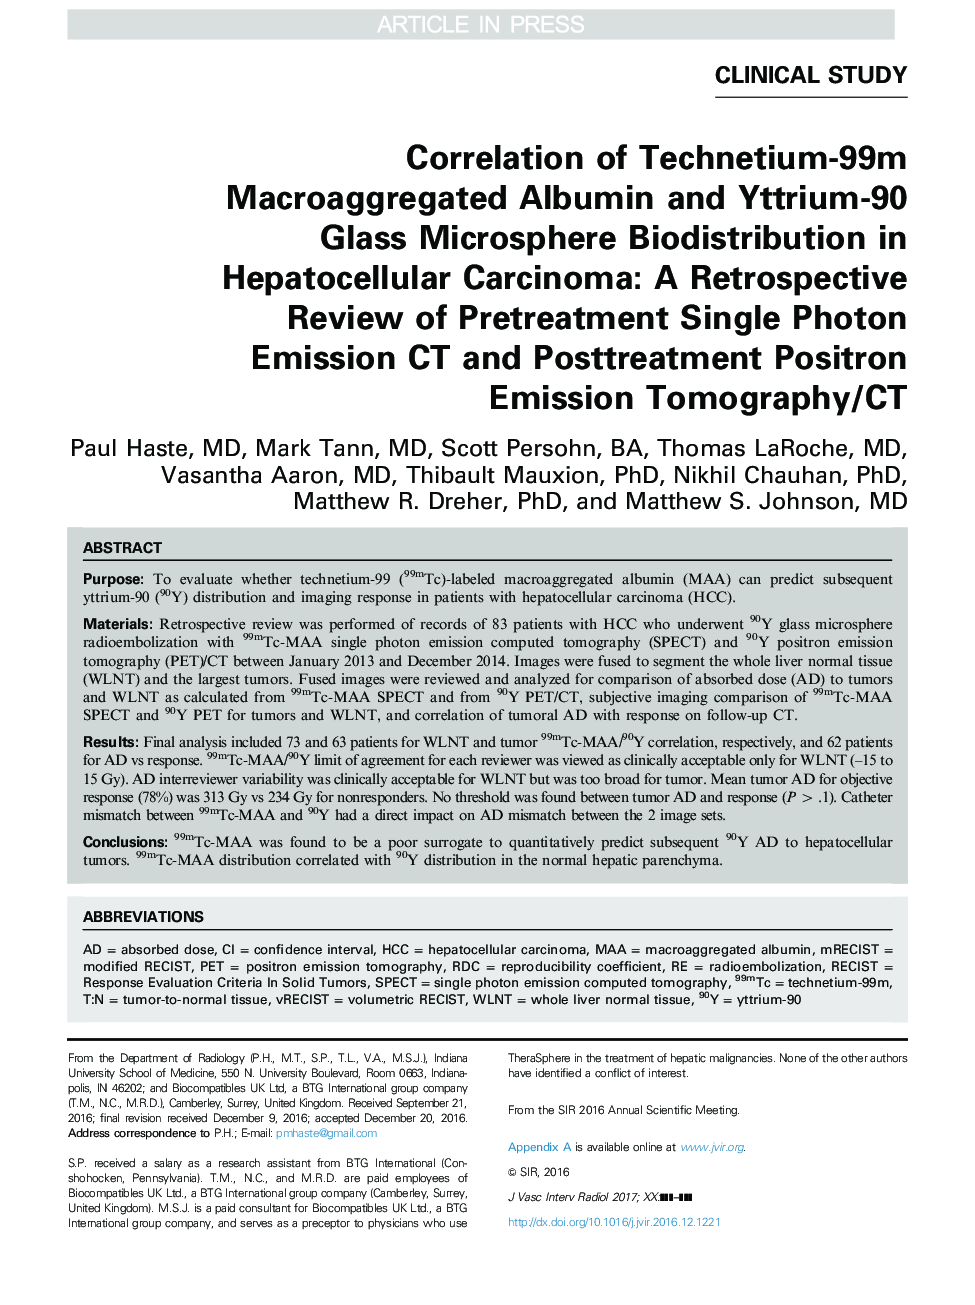 Correlation of Technetium-99m Macroaggregated Albumin and Yttrium-90 Glass Microsphere Biodistribution in Hepatocellular Carcinoma: A Retrospective Review of Pretreatment Single Photon Emission CT and Posttreatment Positron Emission Tomography/CT